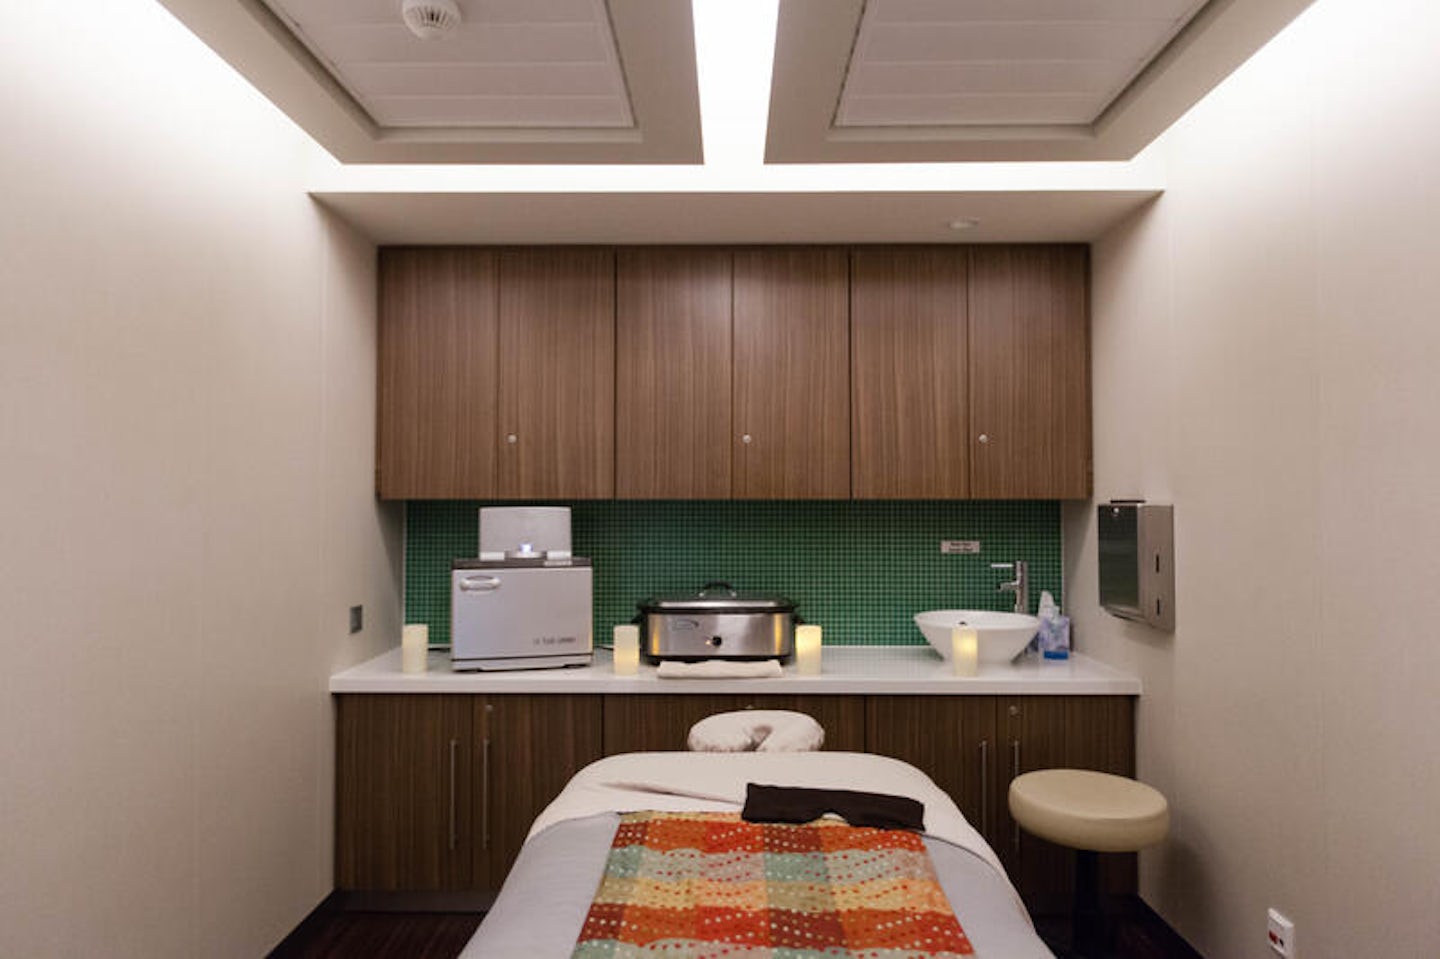 Treatment Room on Celebrity Silhouette